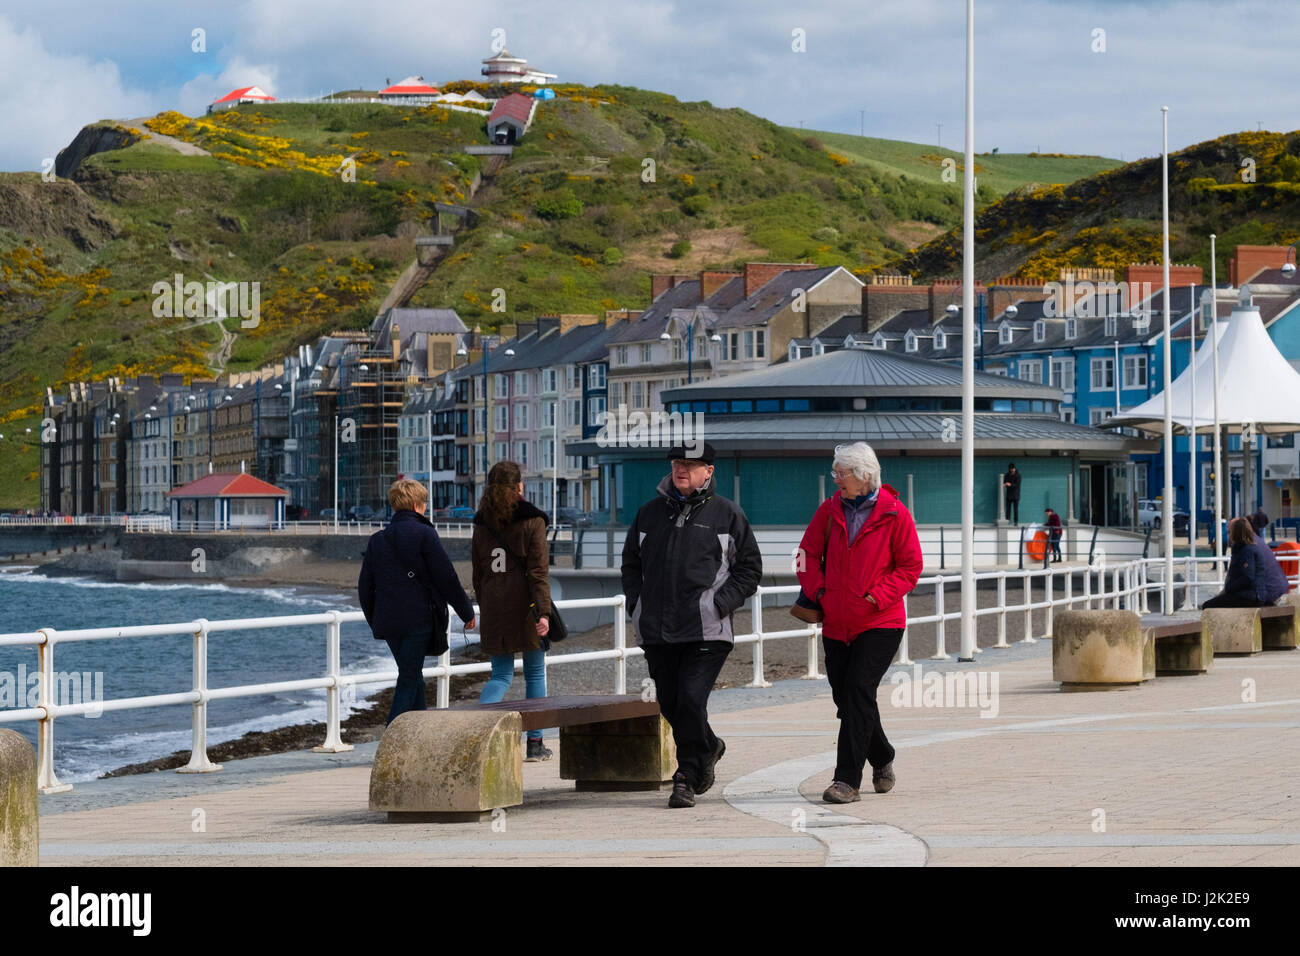 Aberystwyth Wales UK, Saturday 29 April 2017 UK weather - People enjoying a bright sunny but breezy morning at the seaside in Aberystwyth at the start of the Mayday Bank Holiday weekend photo Credit: keith morris/Alamy Live News Stock Photo